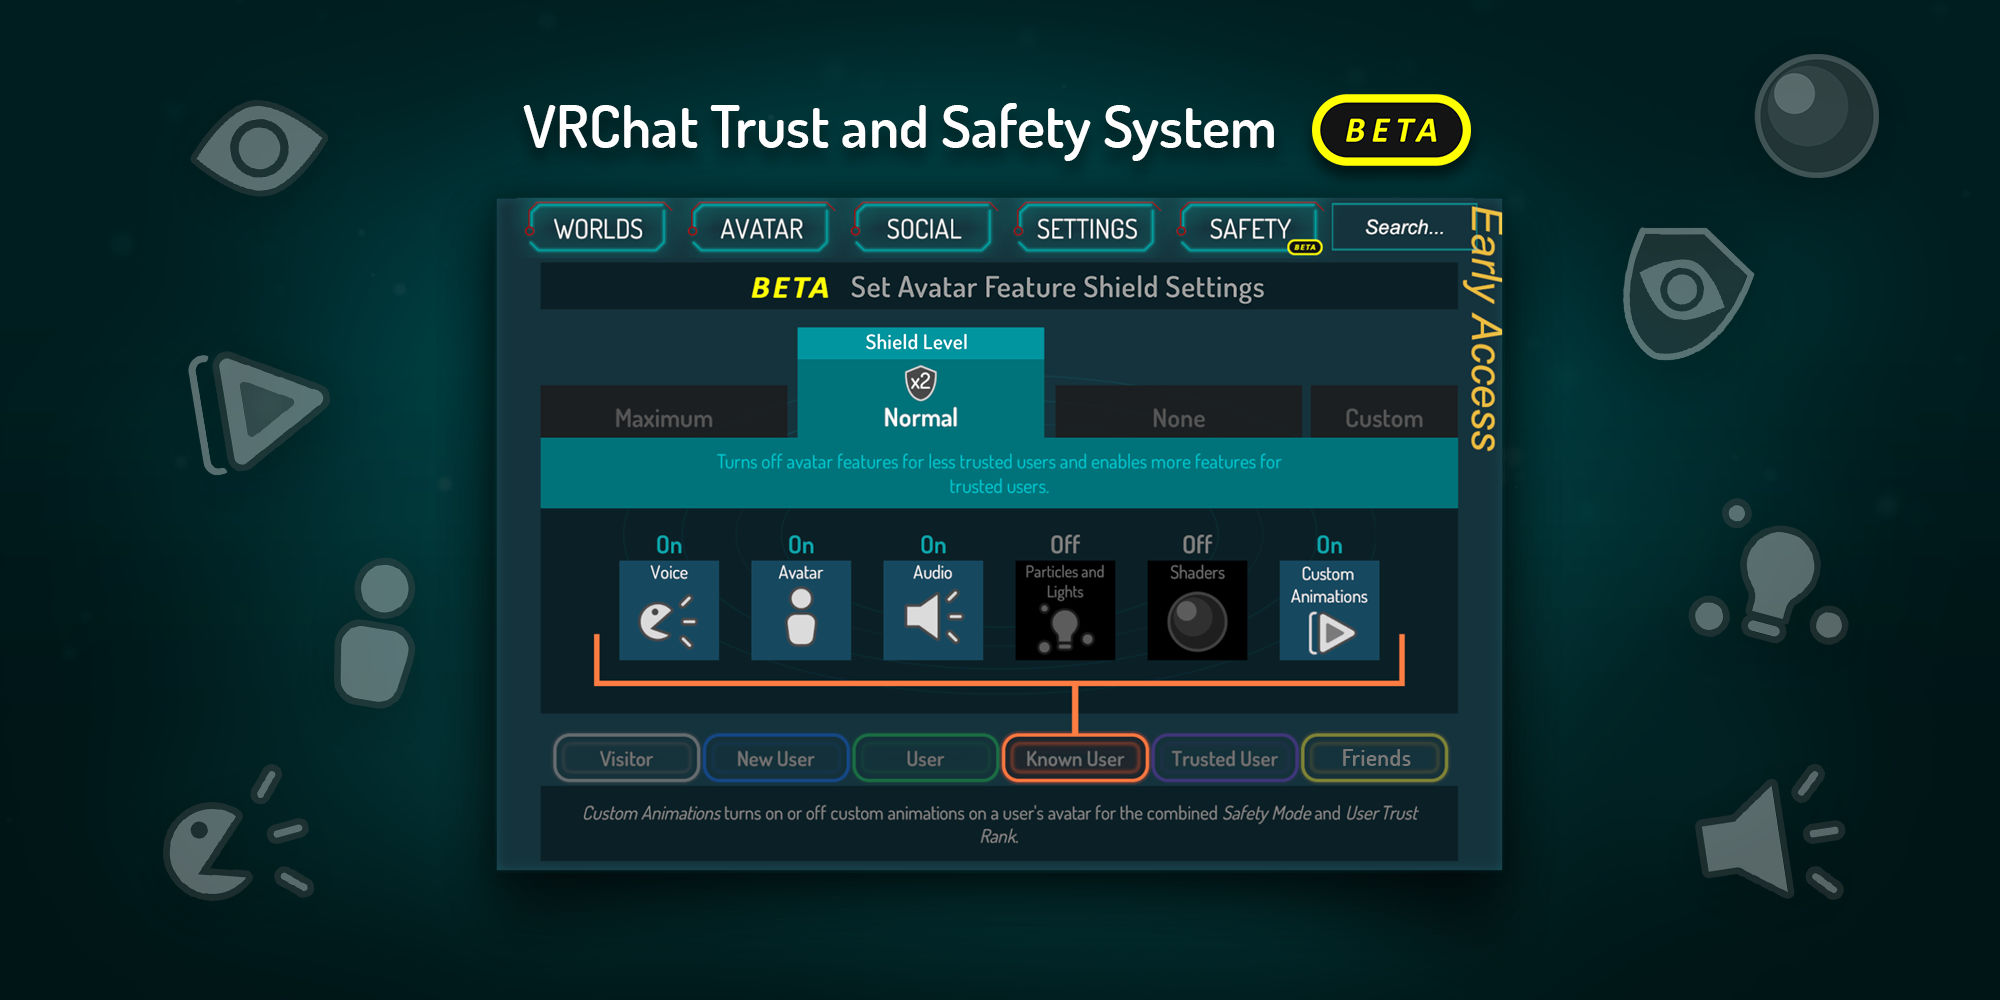 A screenshot showing VRChat's Trust and Safety System's settings.